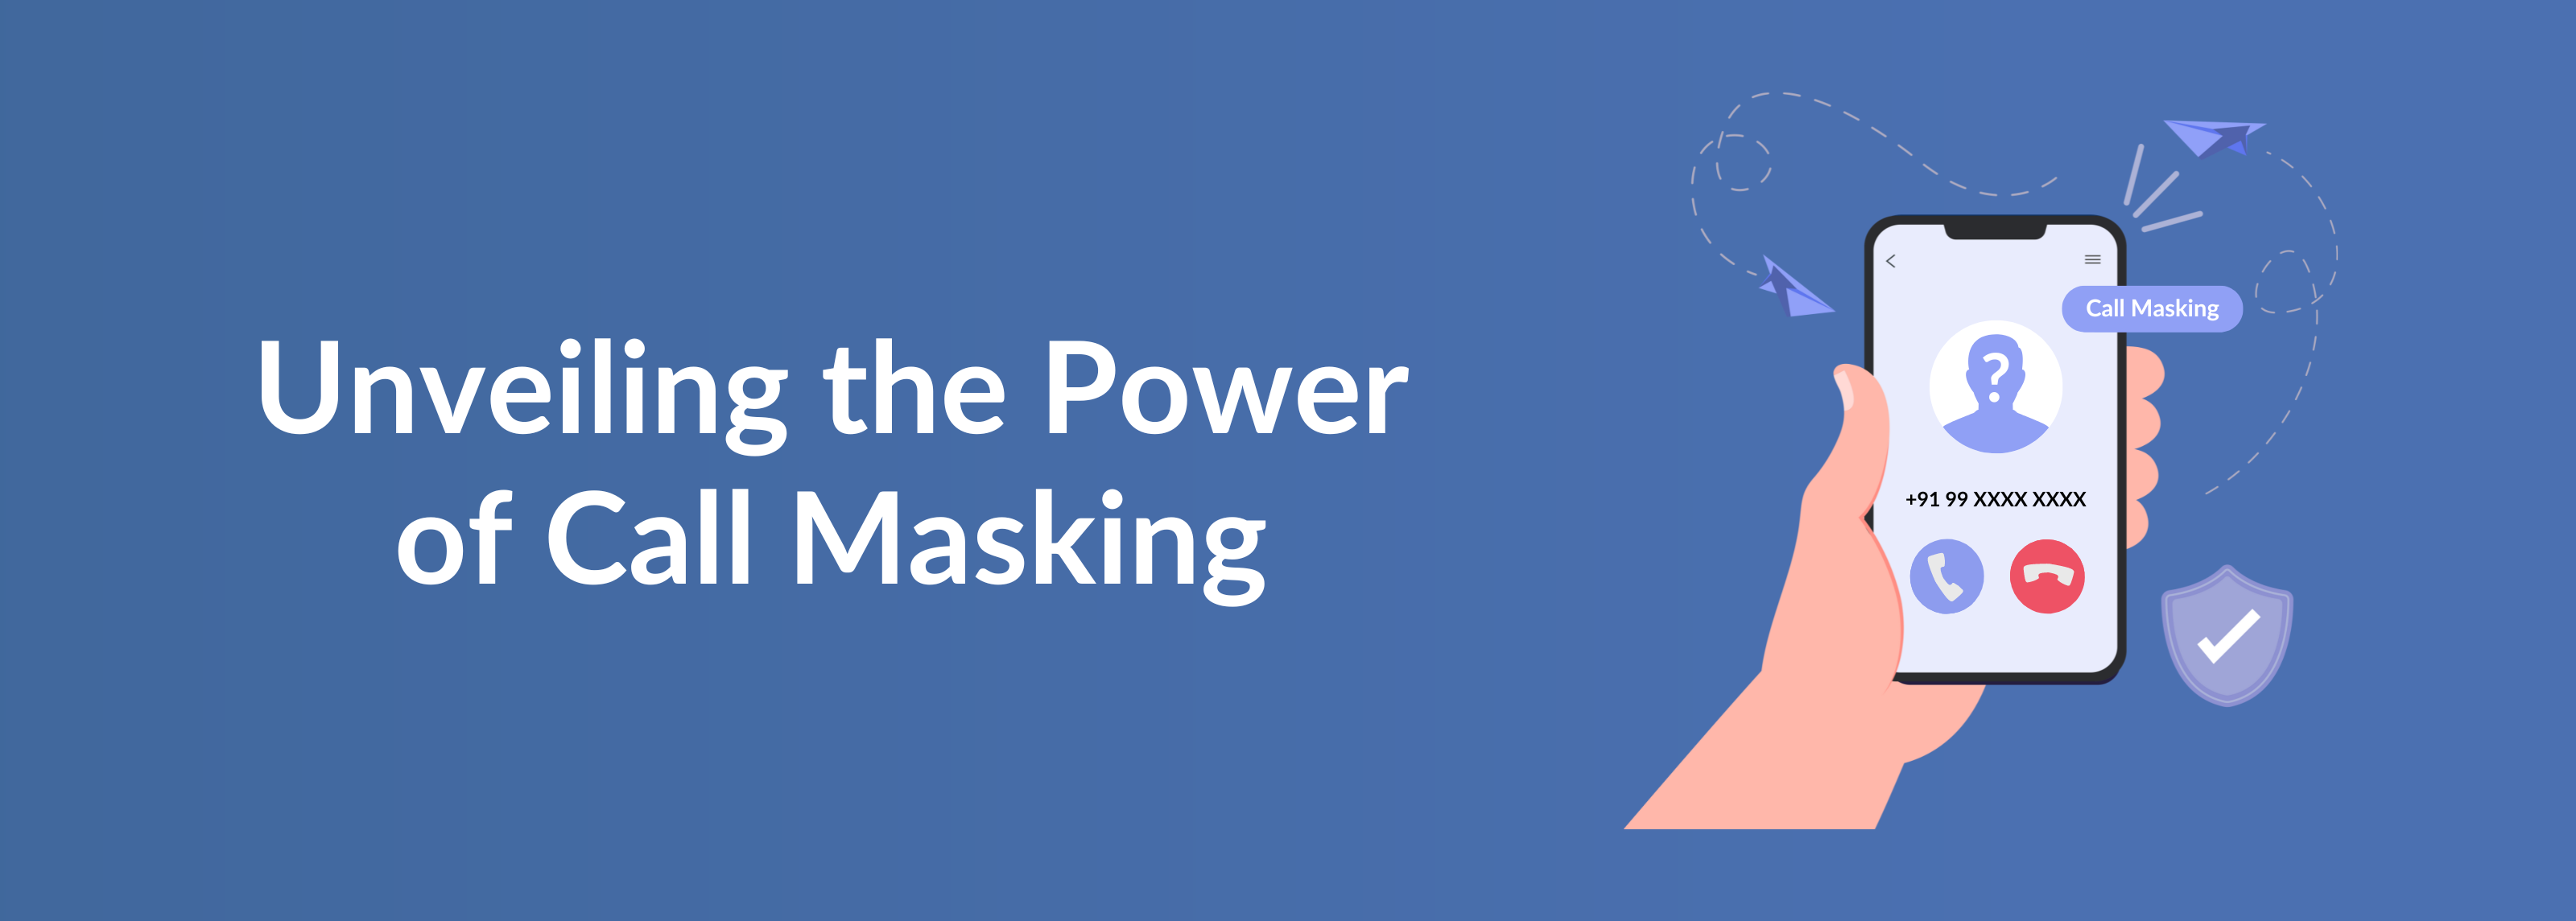 Unveiling the Power of Call Masking